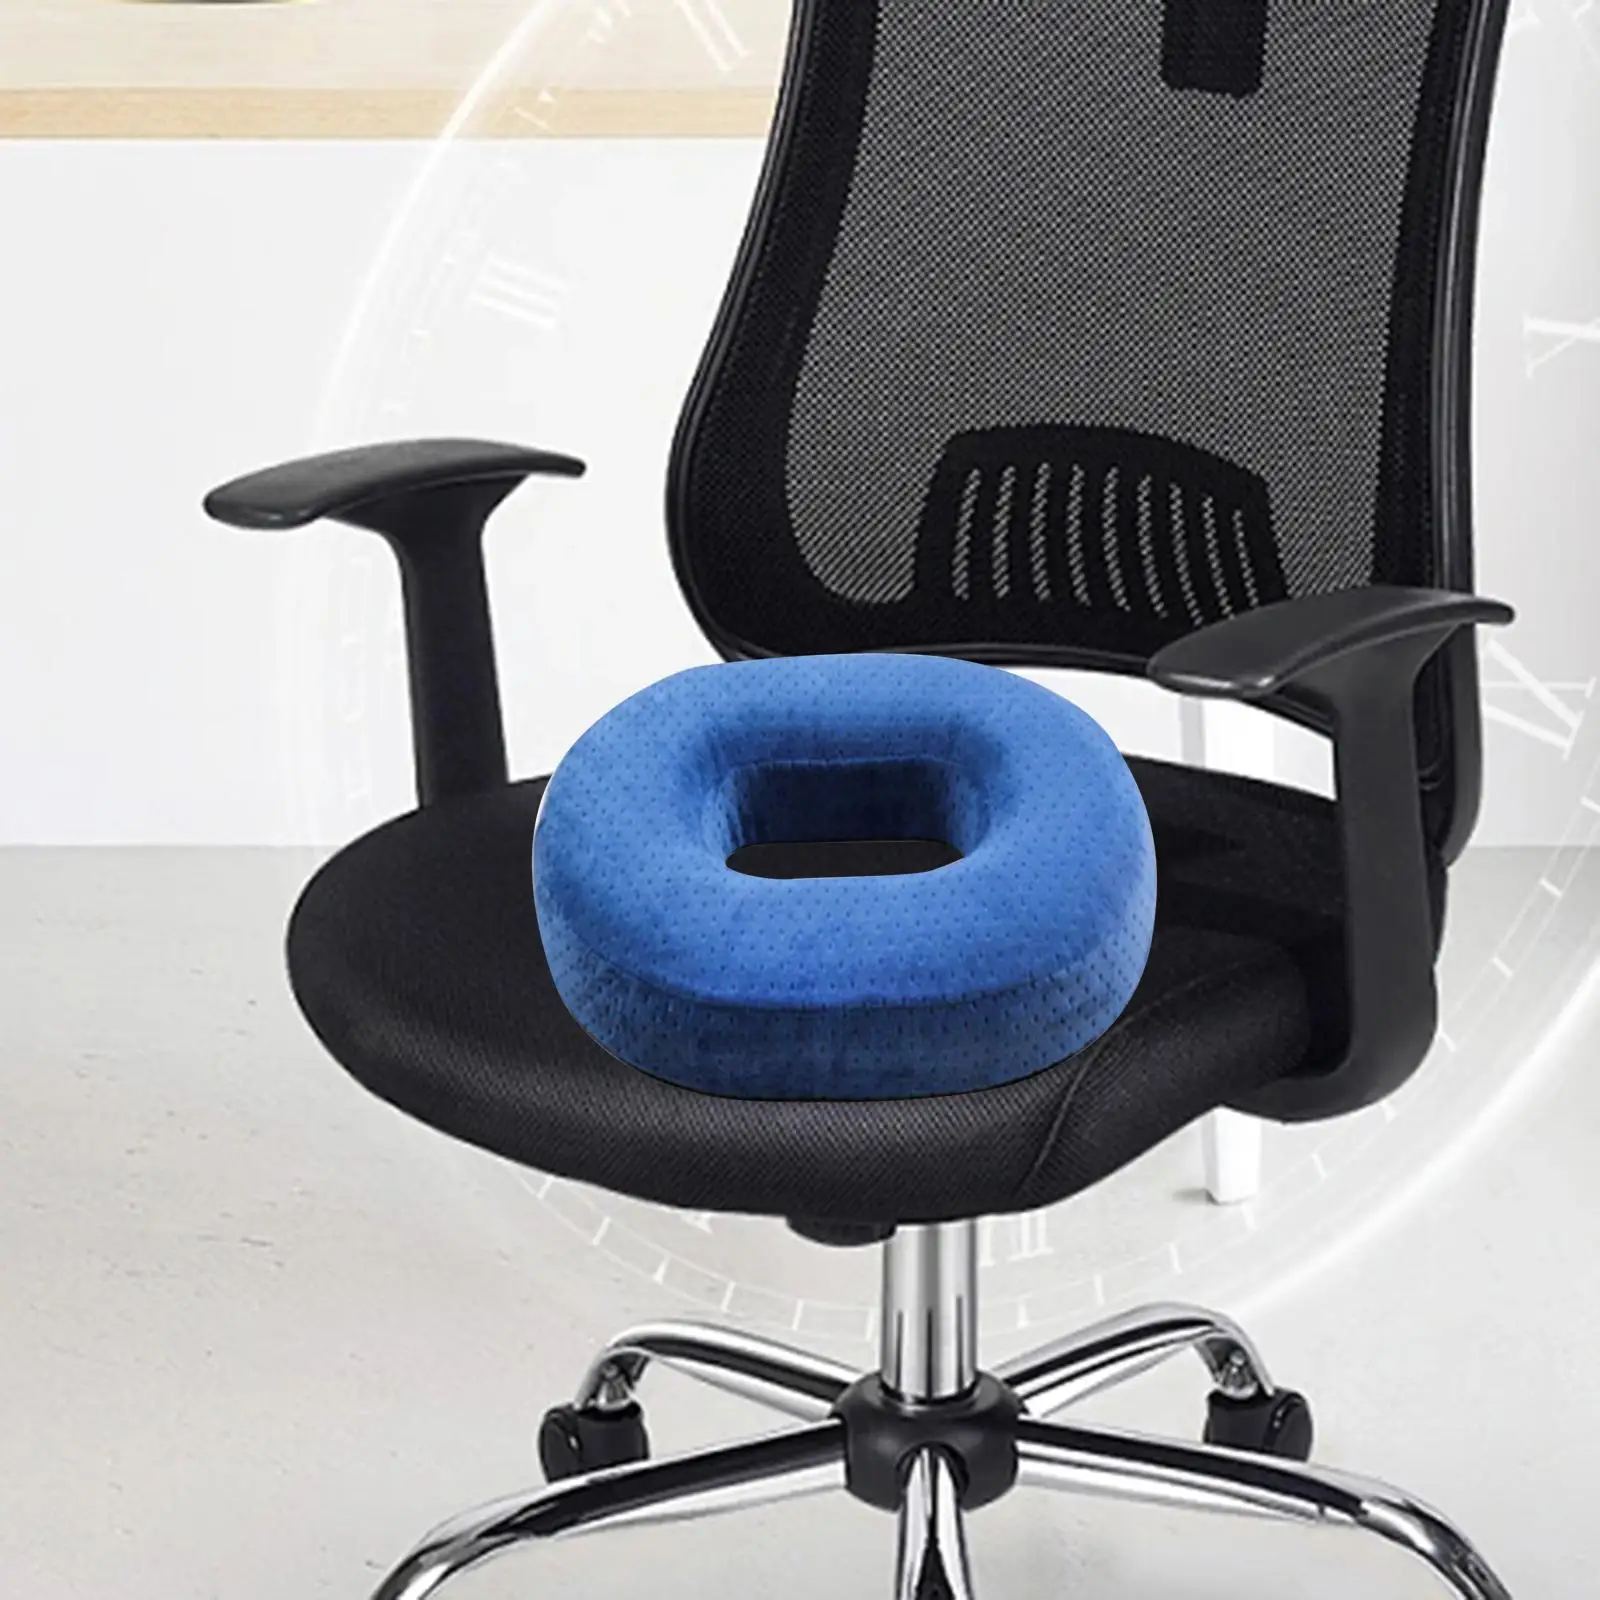 Pressure Relief Seat Cushion Lightweight Easy to Clean Durable Support Donut Cushion Tailbone Cushion for Office Home Chair Car